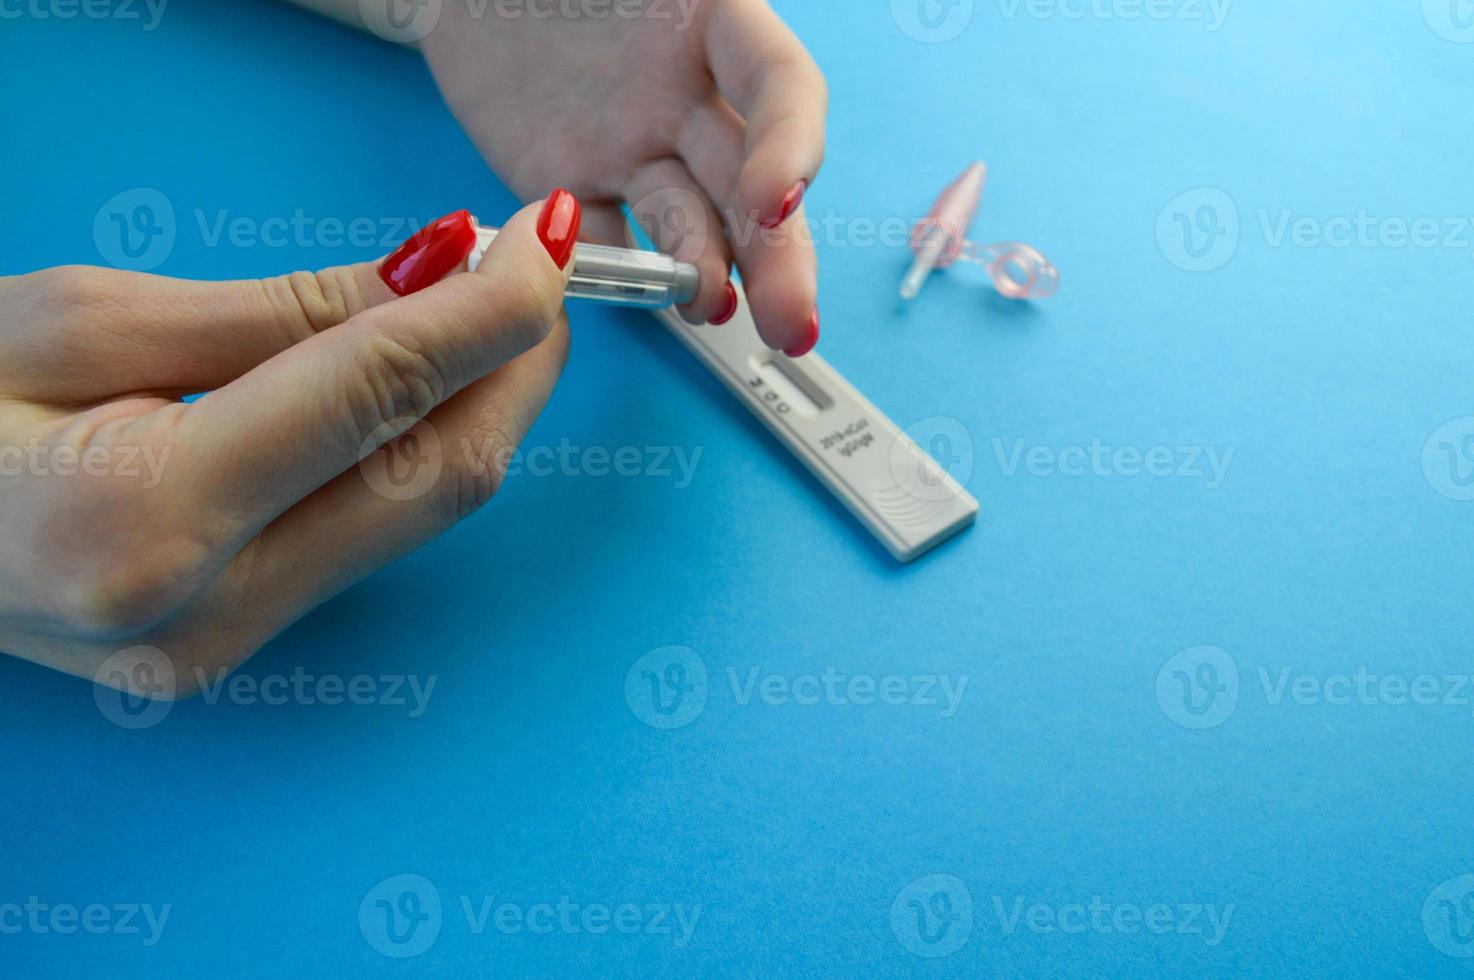 Rapid COVID-19 test for detection of specific antibodies IgM and IgG to novel corona virus SARS-CoV-2 causing Covid-19 disease. Hand holding test on blue mint background photo